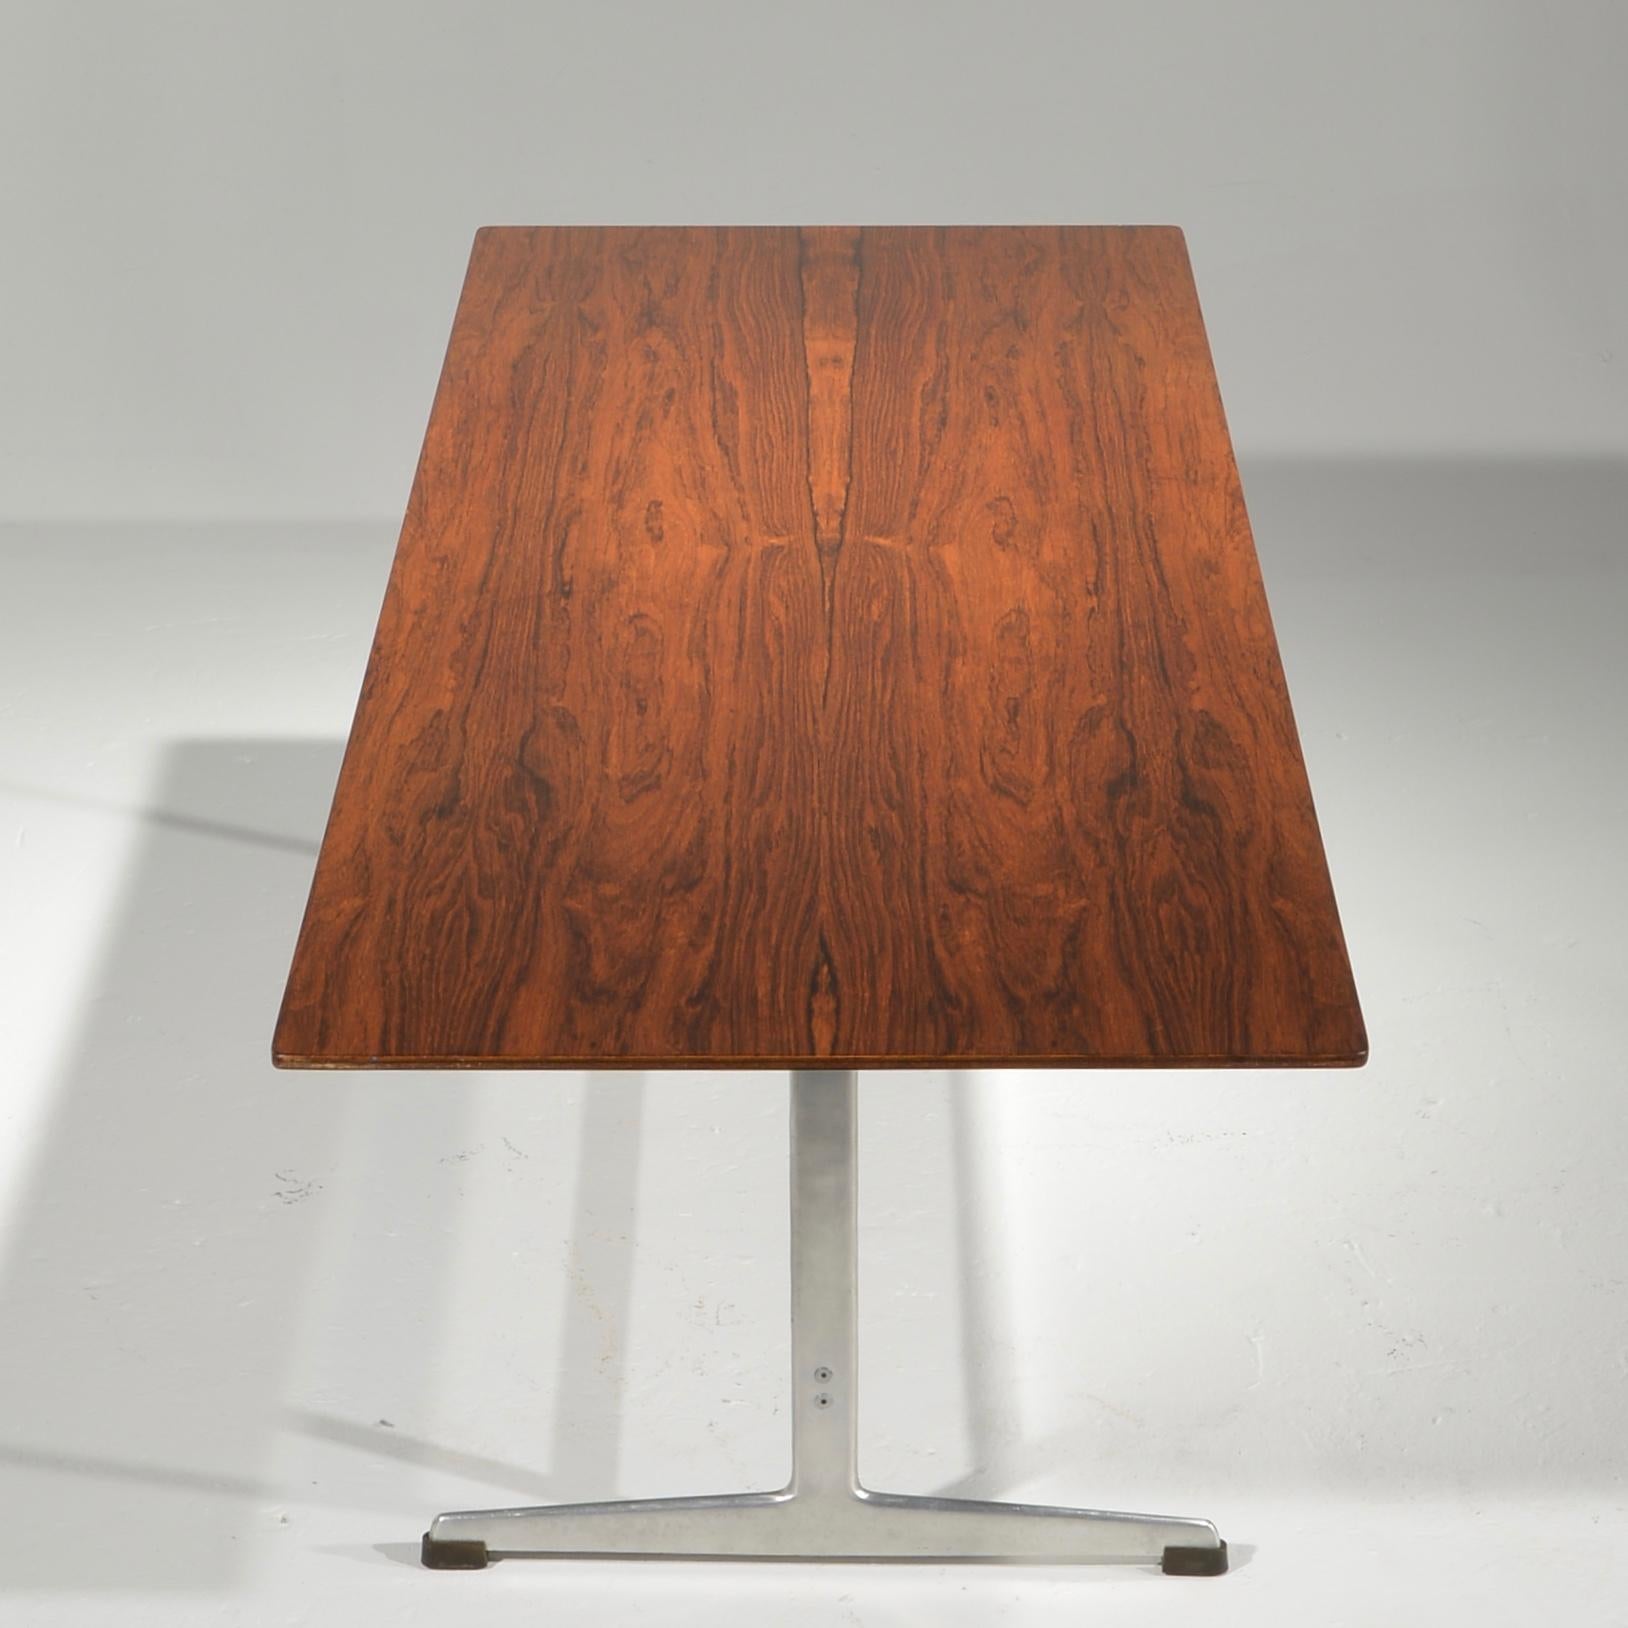 Rare Arne Jacobsen Rosewood Coffee Table In Excellent Condition For Sale In Los Angeles, CA